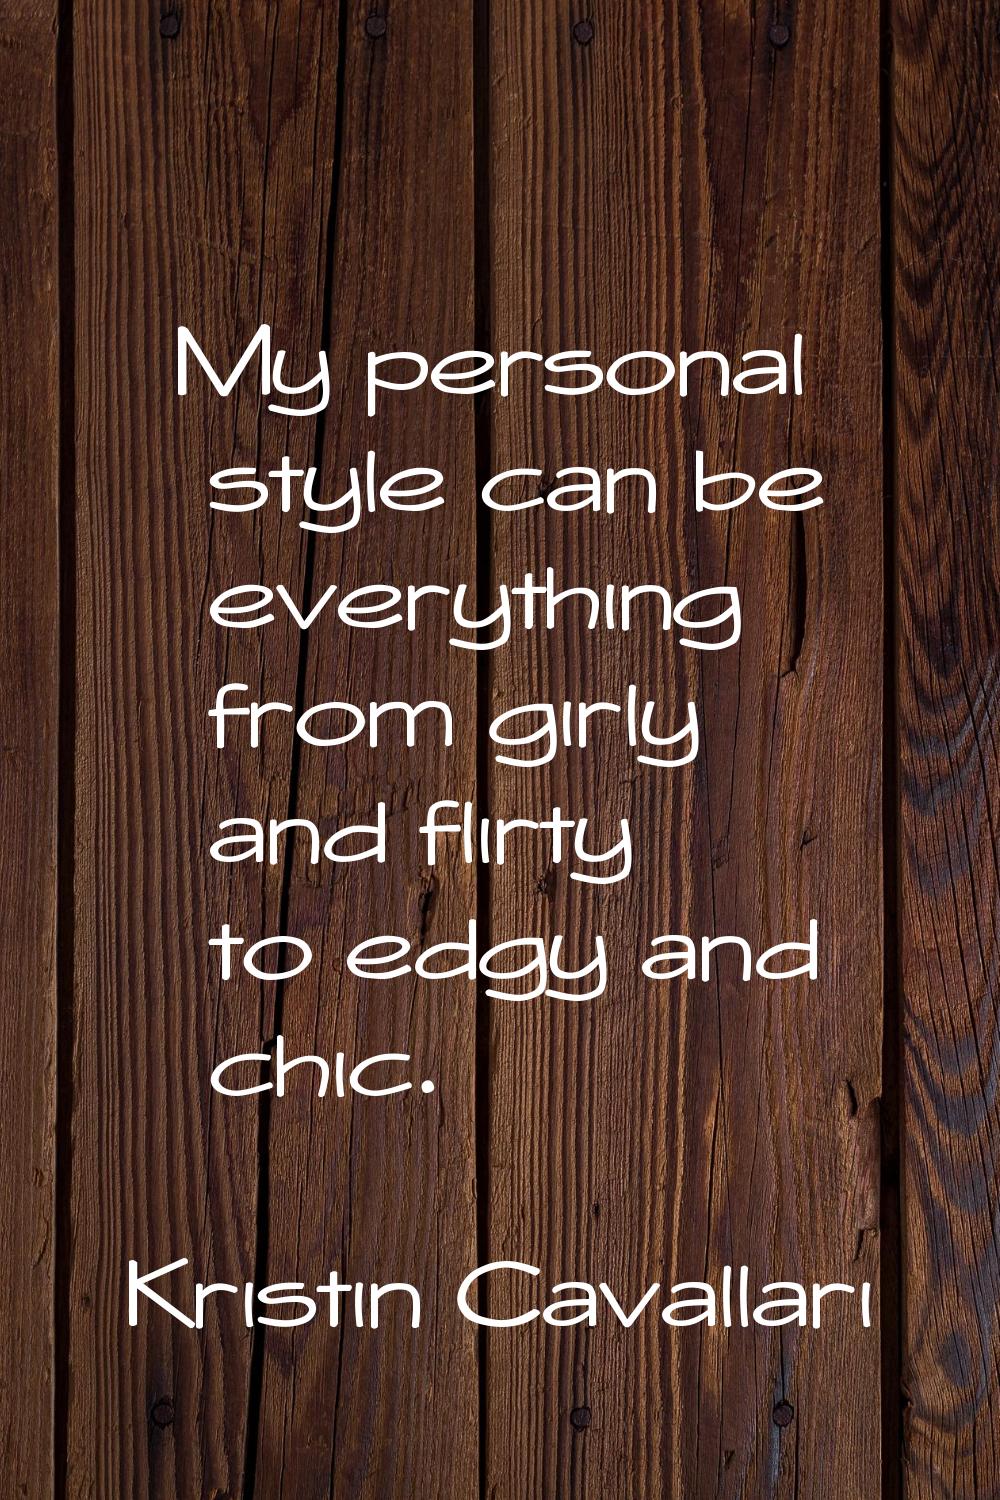 My personal style can be everything from girly and flirty to edgy and chic.